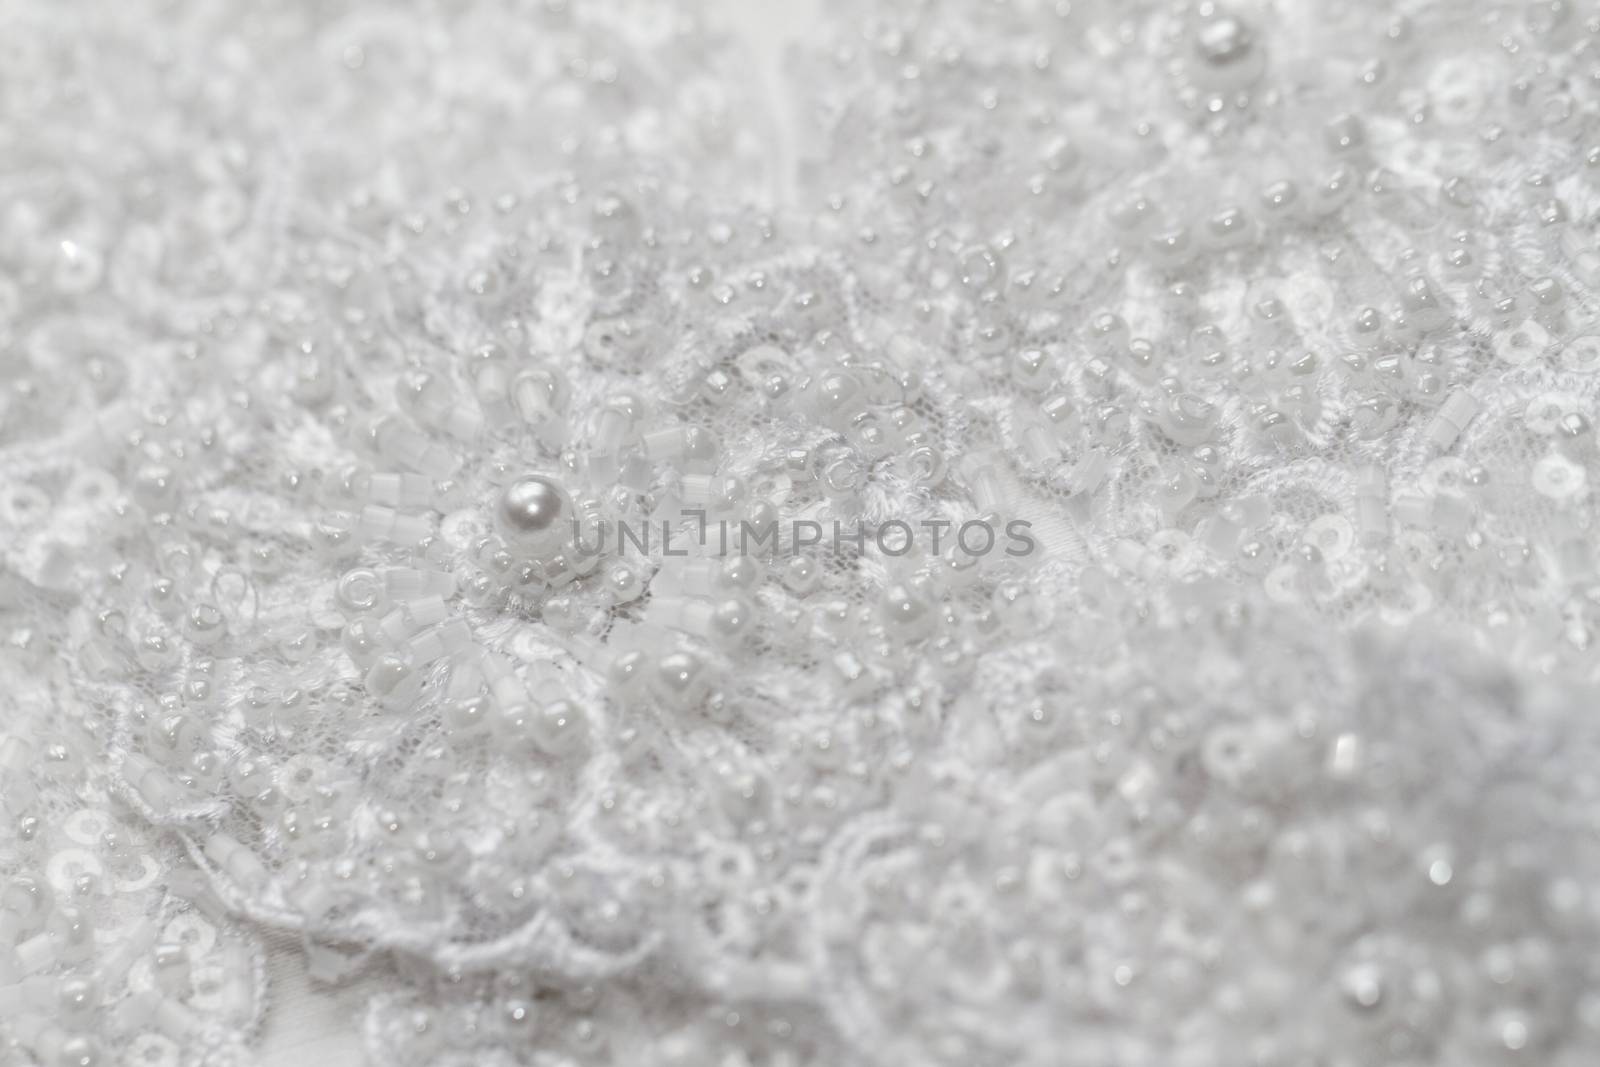 Luxury wedding lace with pearls on white background